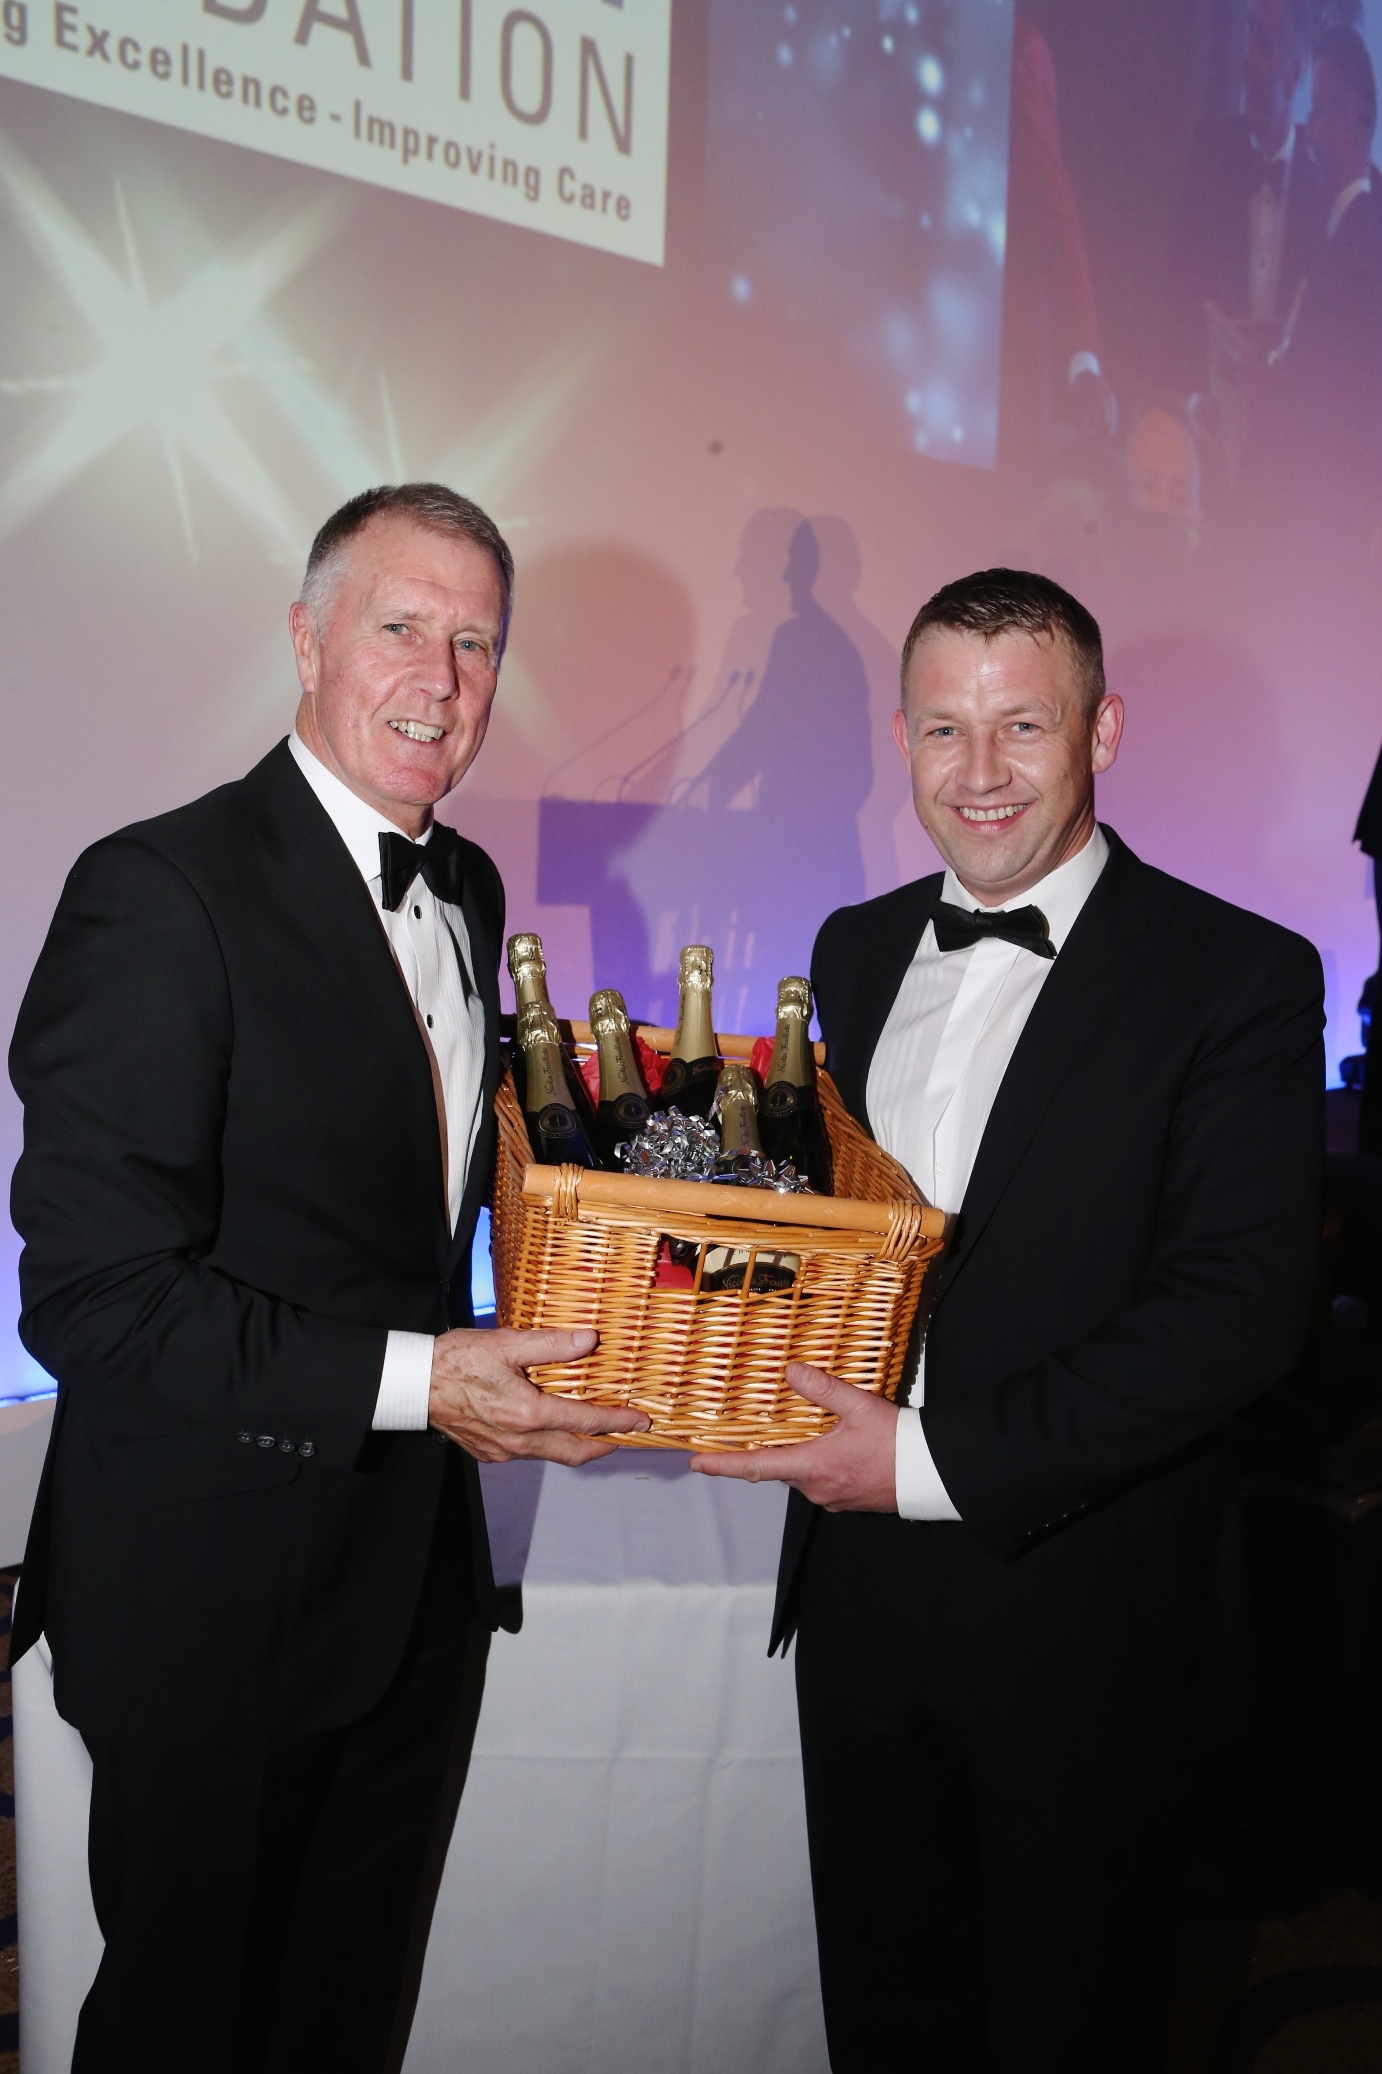 John Davidson of Davidson Retail Butchers collecting his champagne raffle prize from Geoff Hurst.